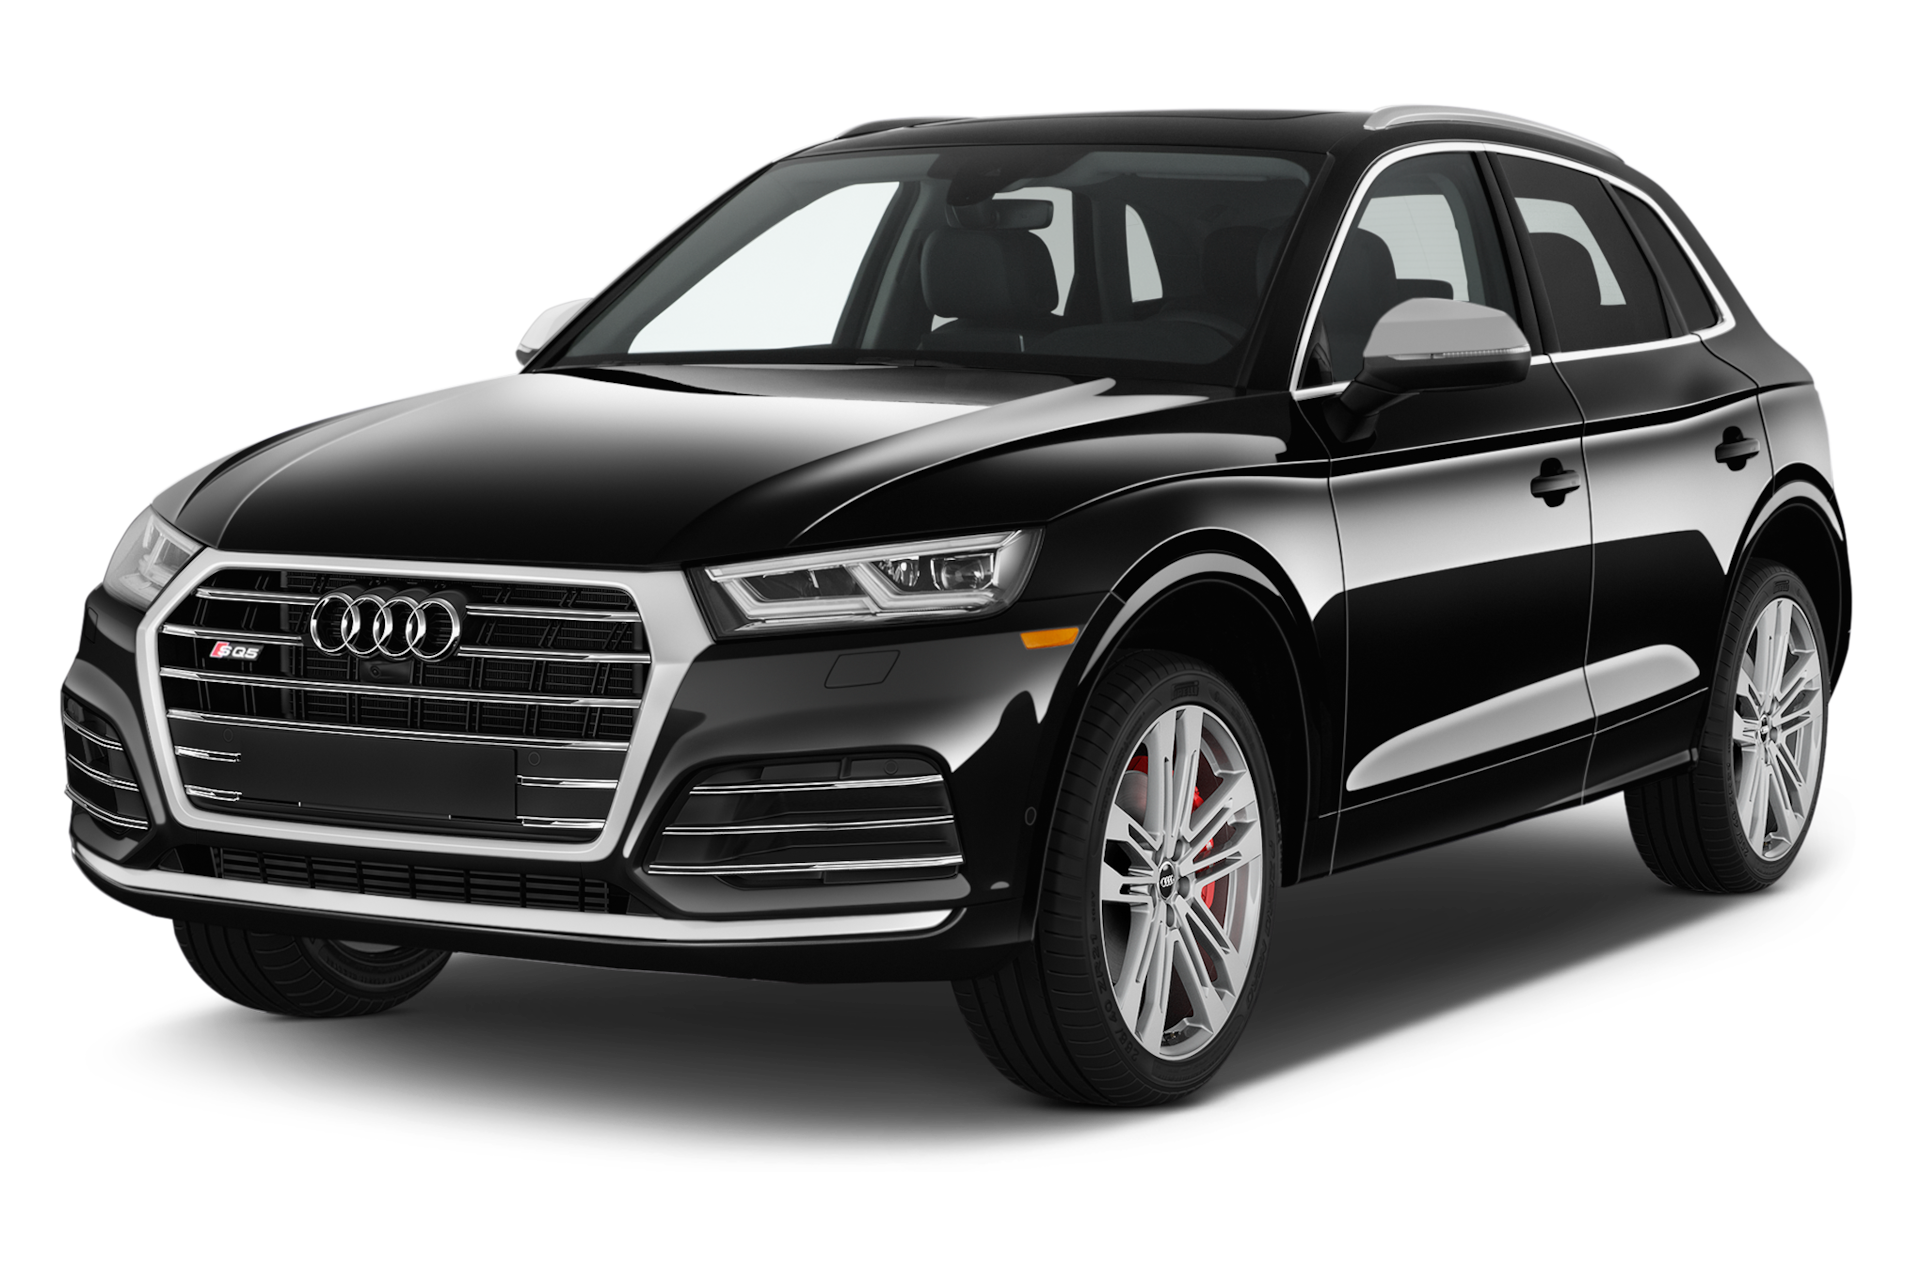 2020 Audi SQ5 Prices, Reviews, and Photos - MotorTrend